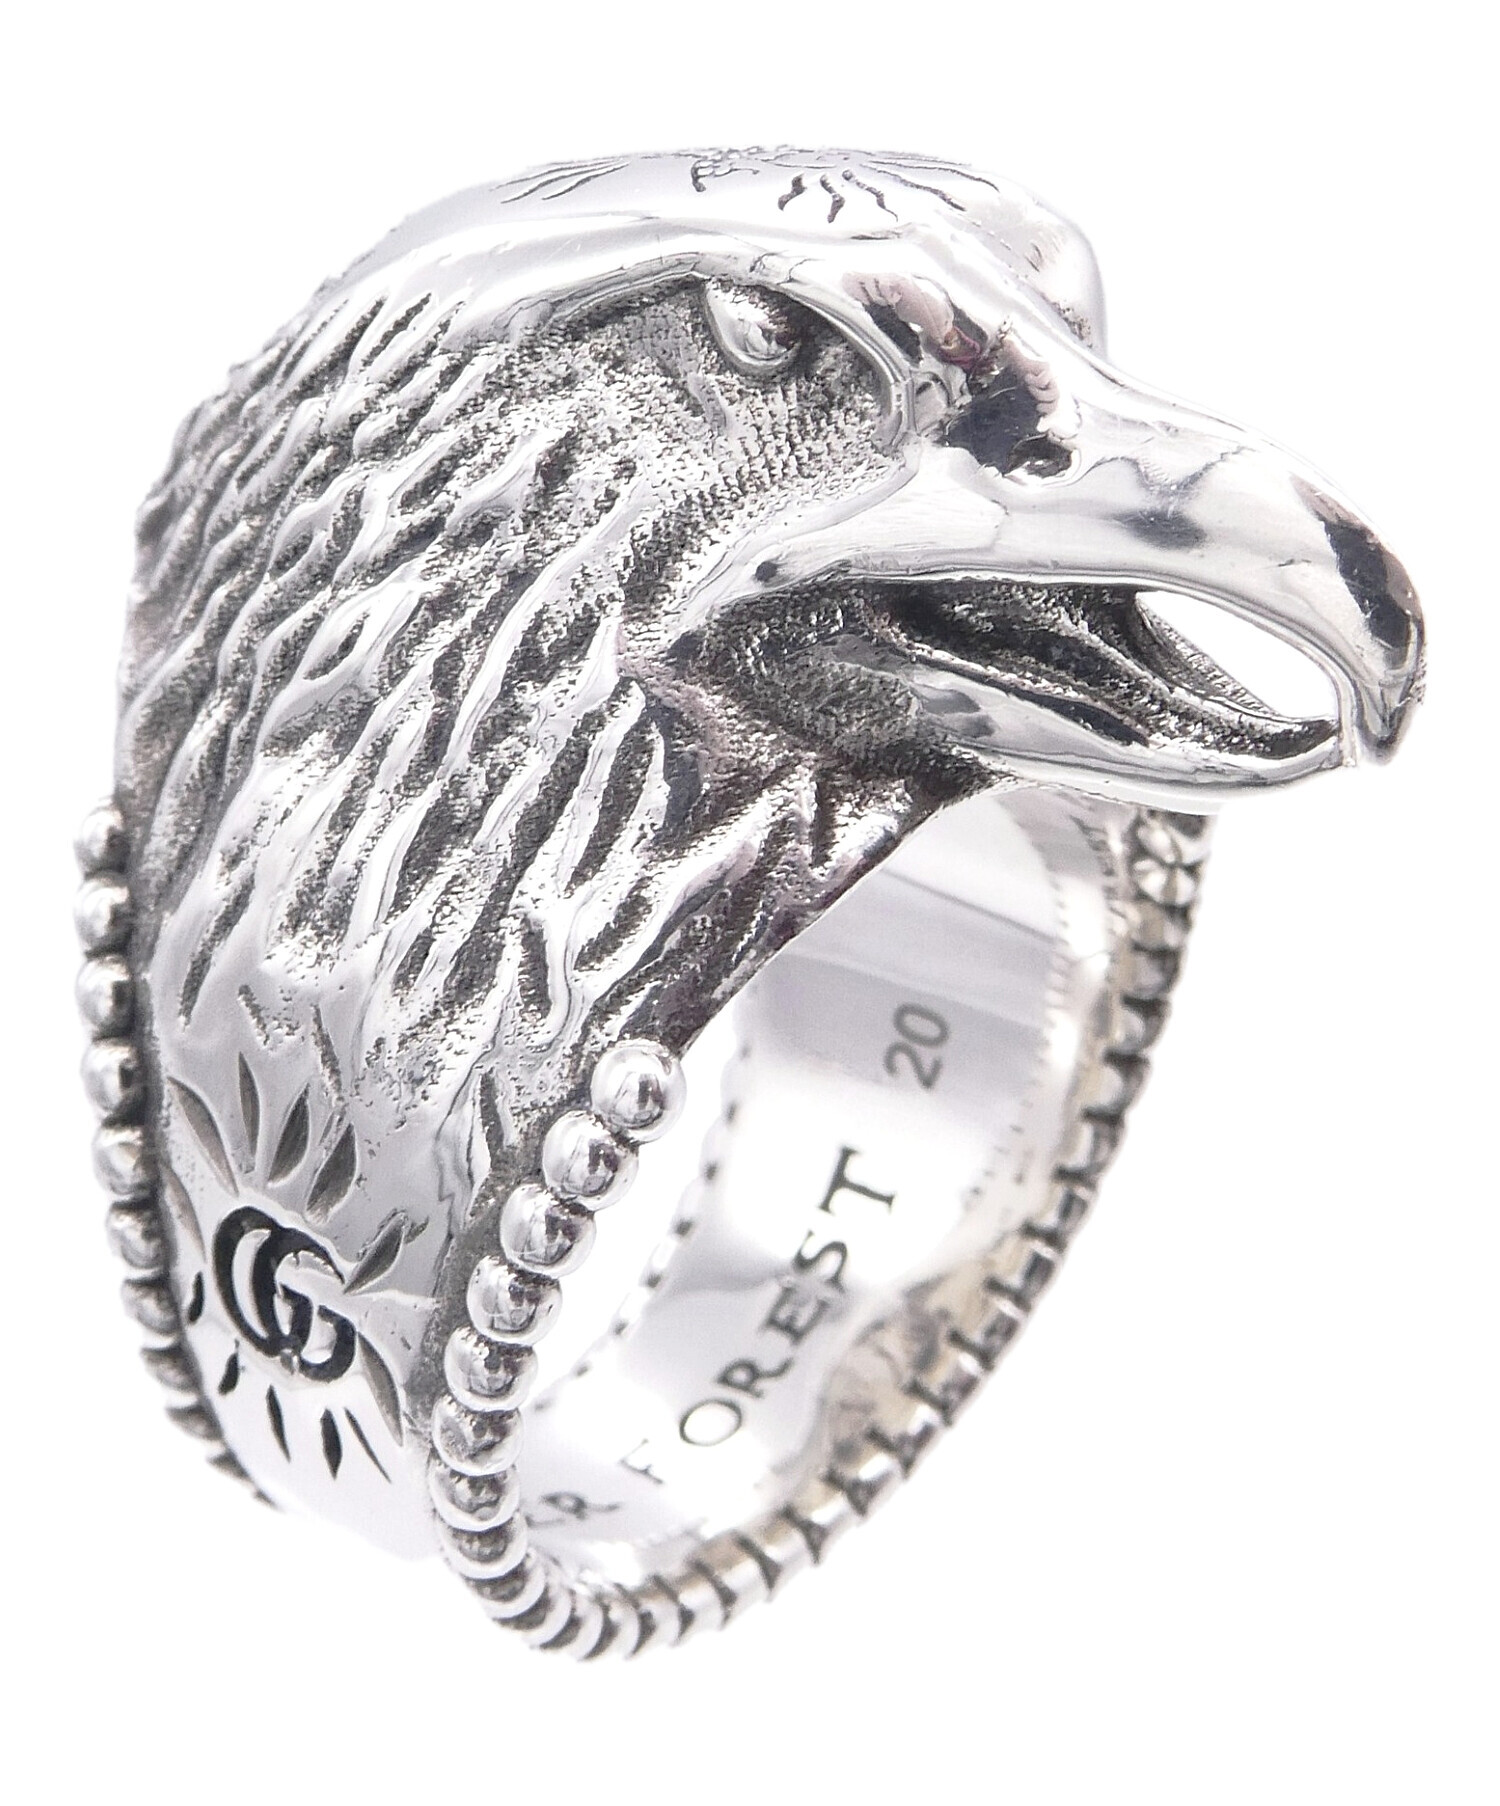 GUCCI (グッチ) ANGER FOREST EAGLE HEAD RING サイズ:20